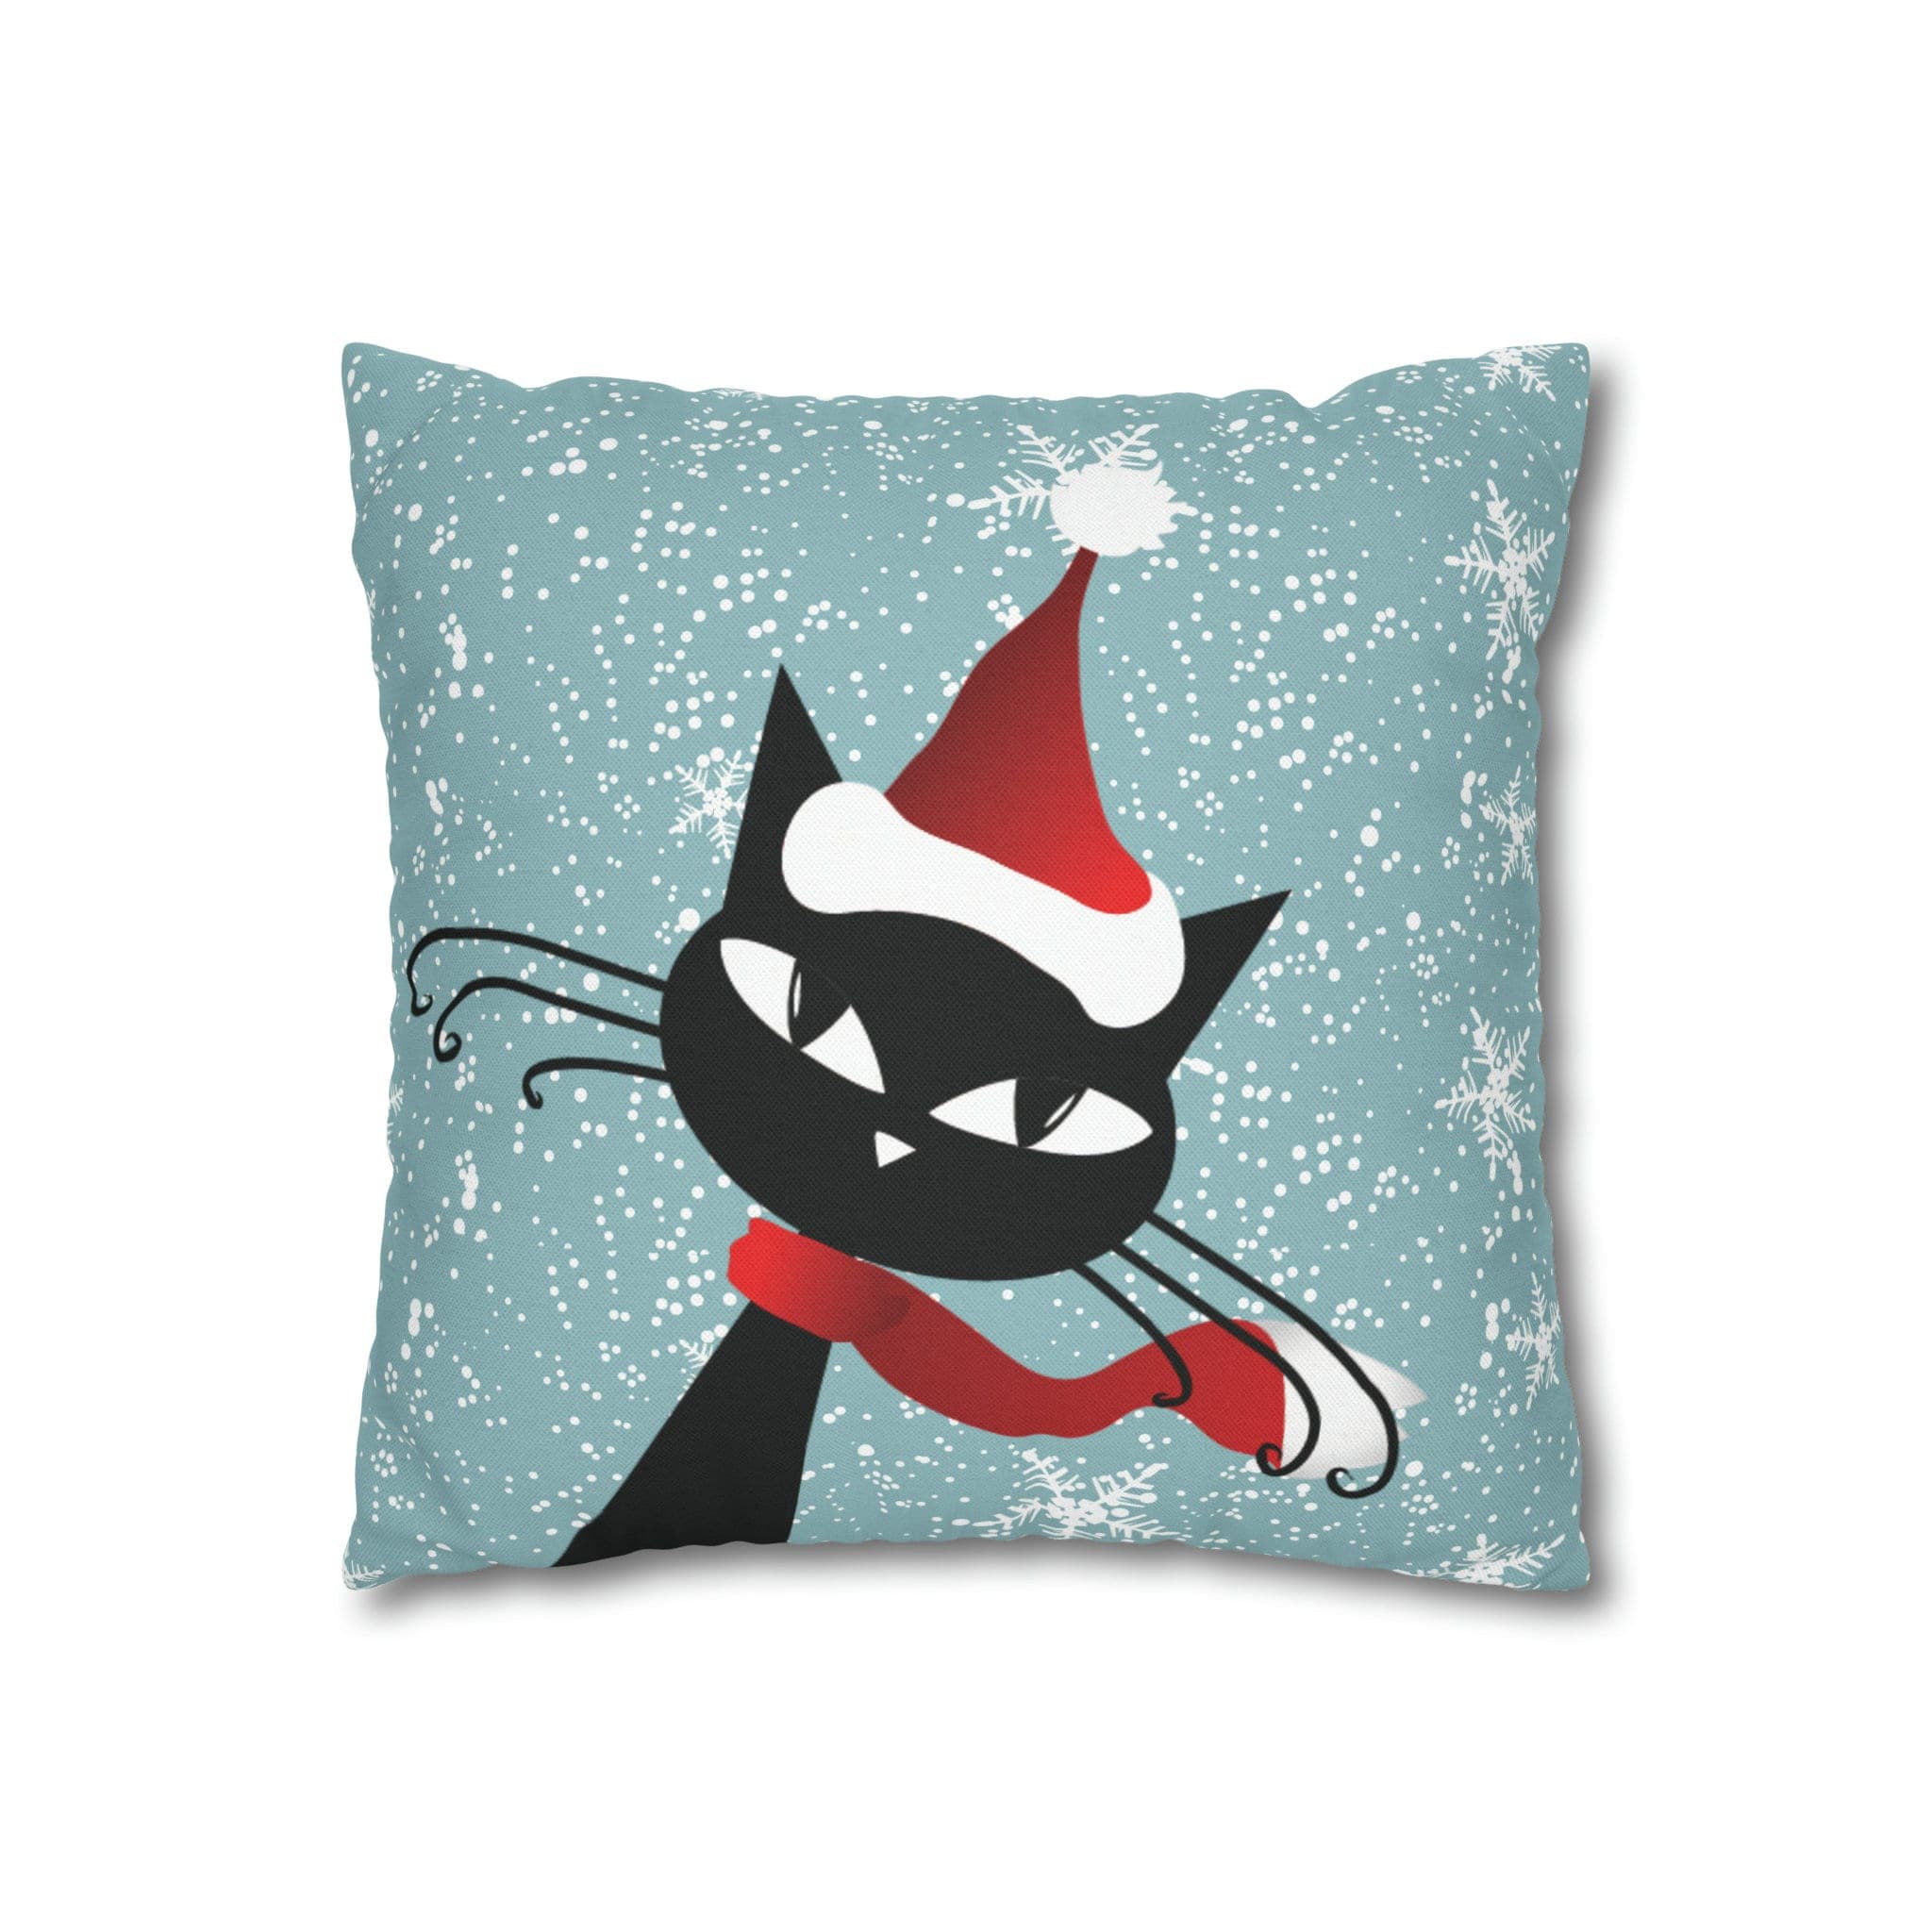 Kate McEnroe New York Retro Atomic Cat Snowflakes Pillow Cover, Mid Century Modern Blue Holiday Cushion Covers, MCM Pillow CaseThrow Pillow Covers33832761851449409032